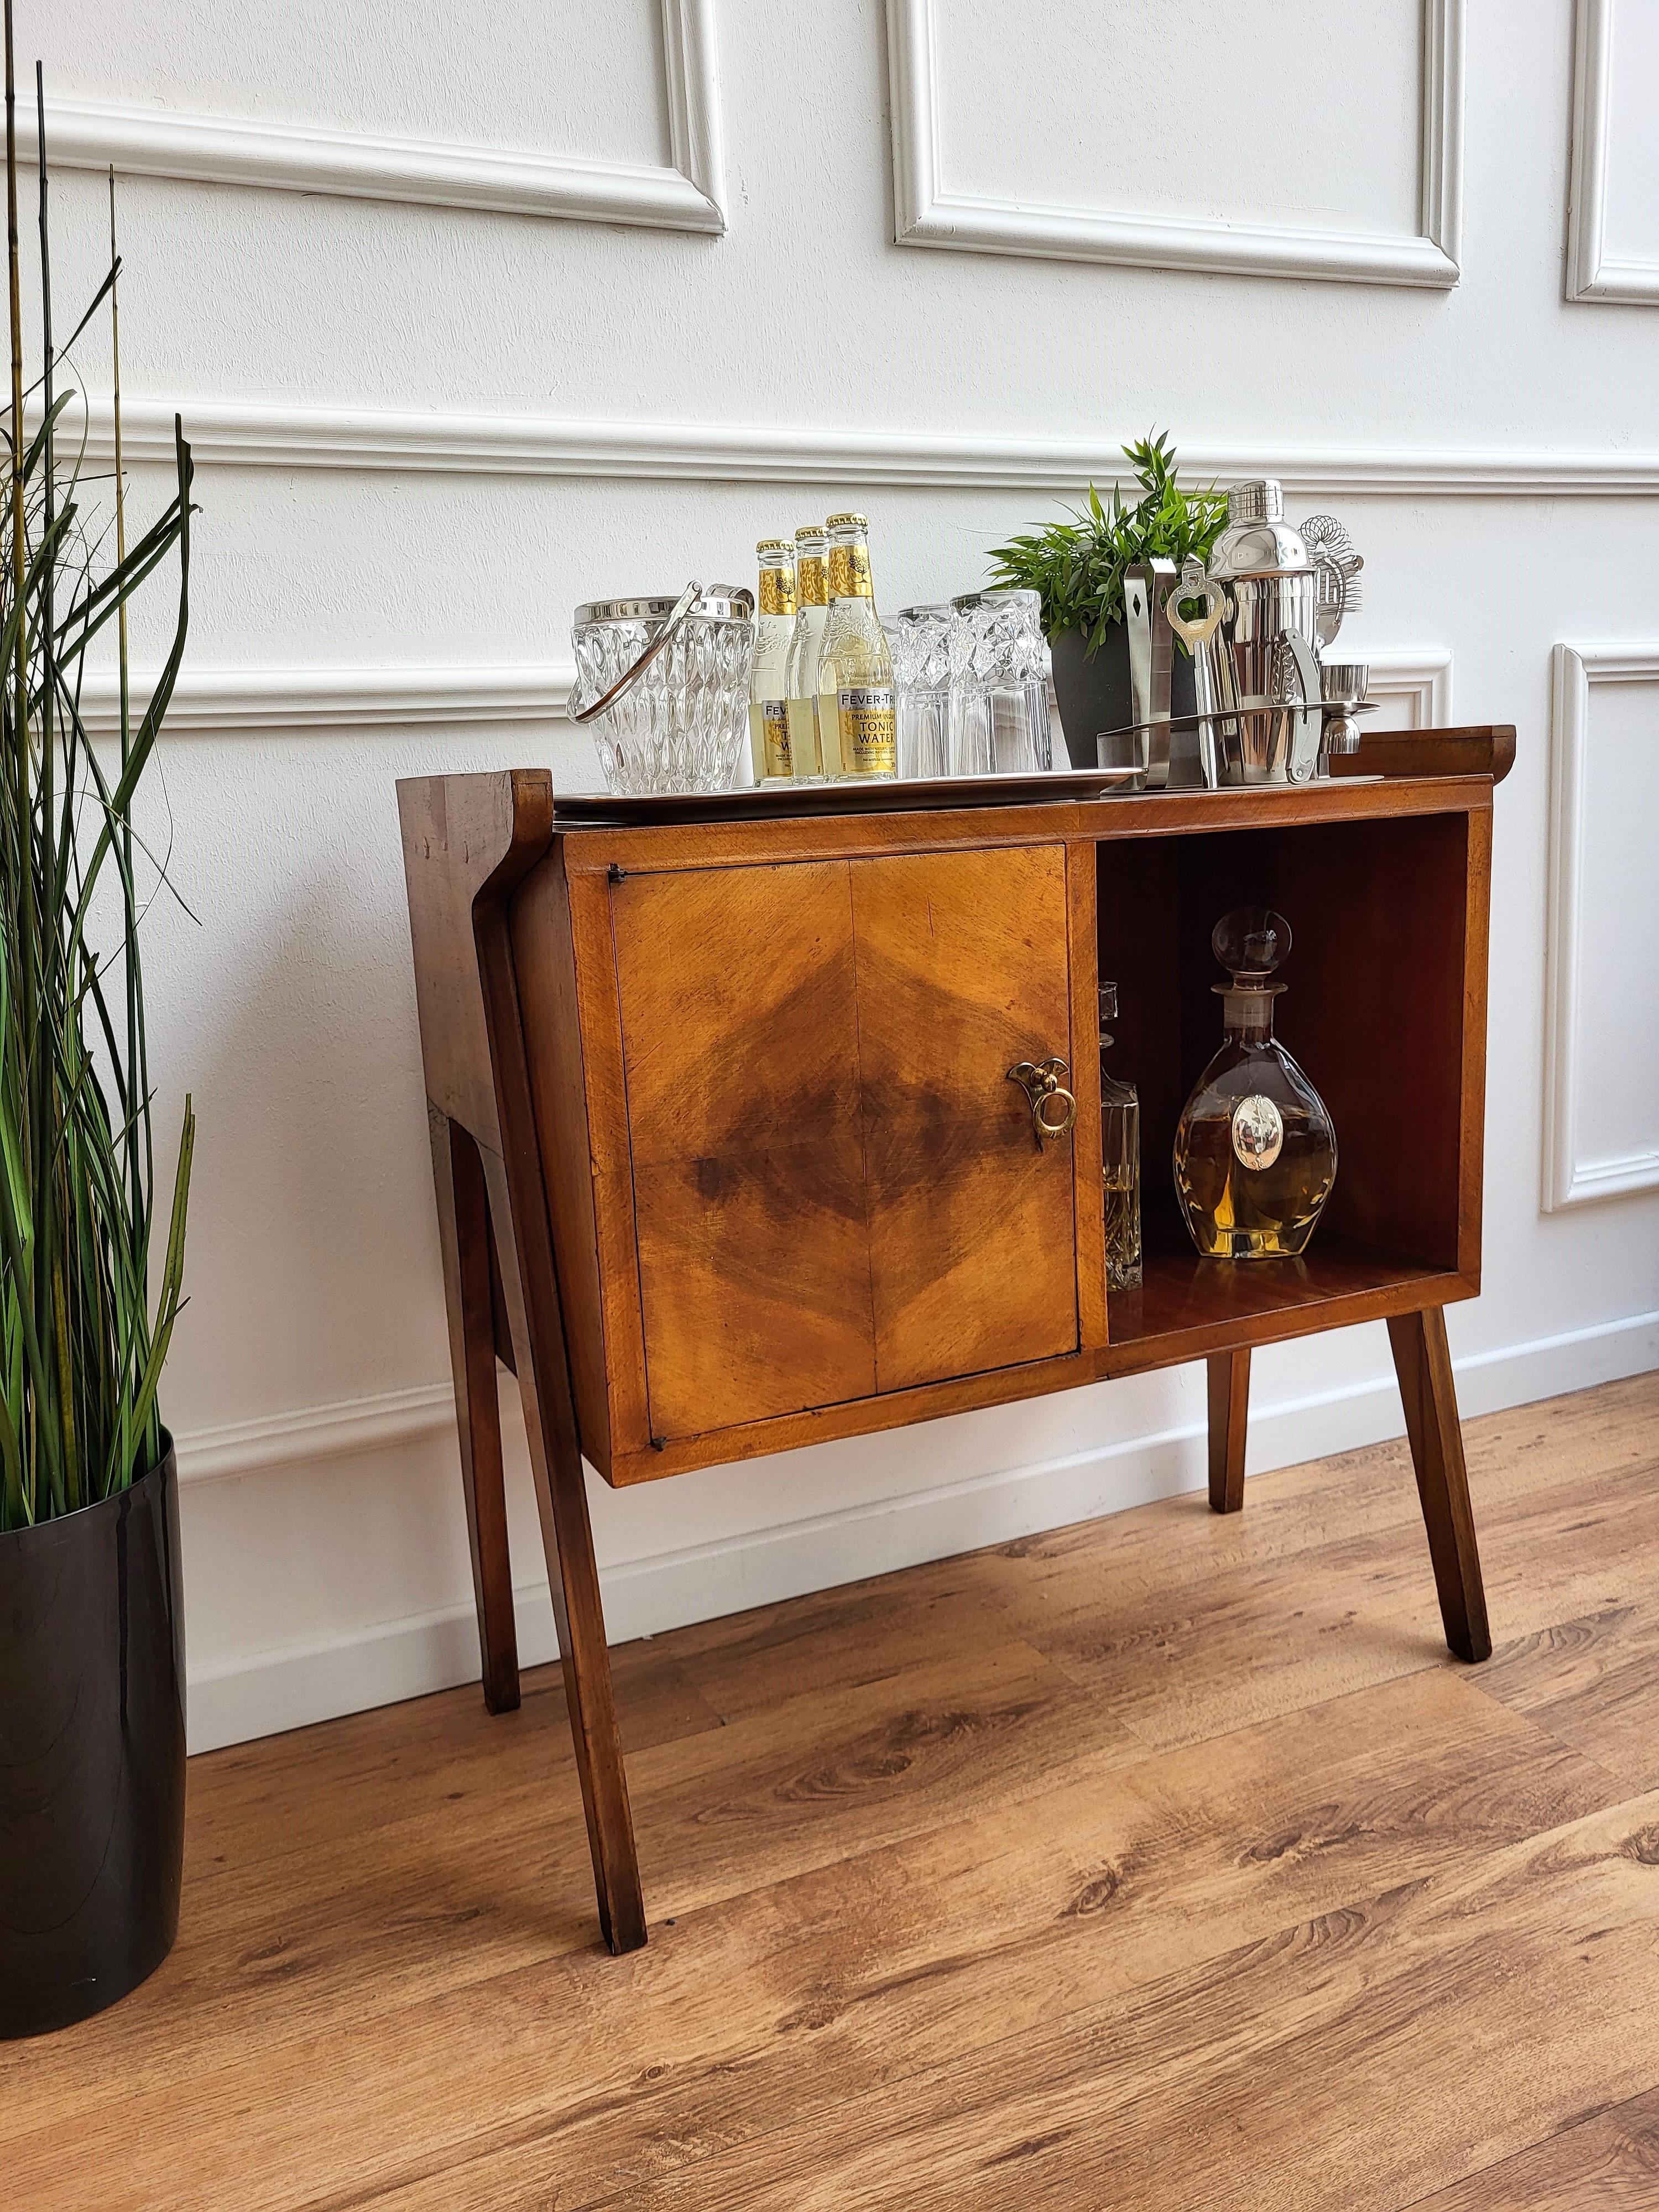 Beautiful and very elegantly shaped Italian Mid-Century Modern dry bar cabinet, with highlighted wood grain and brass handles. The left door opens to a nice storage space and the cabinet is standing on its greatly shaped 4 legs in the immediately